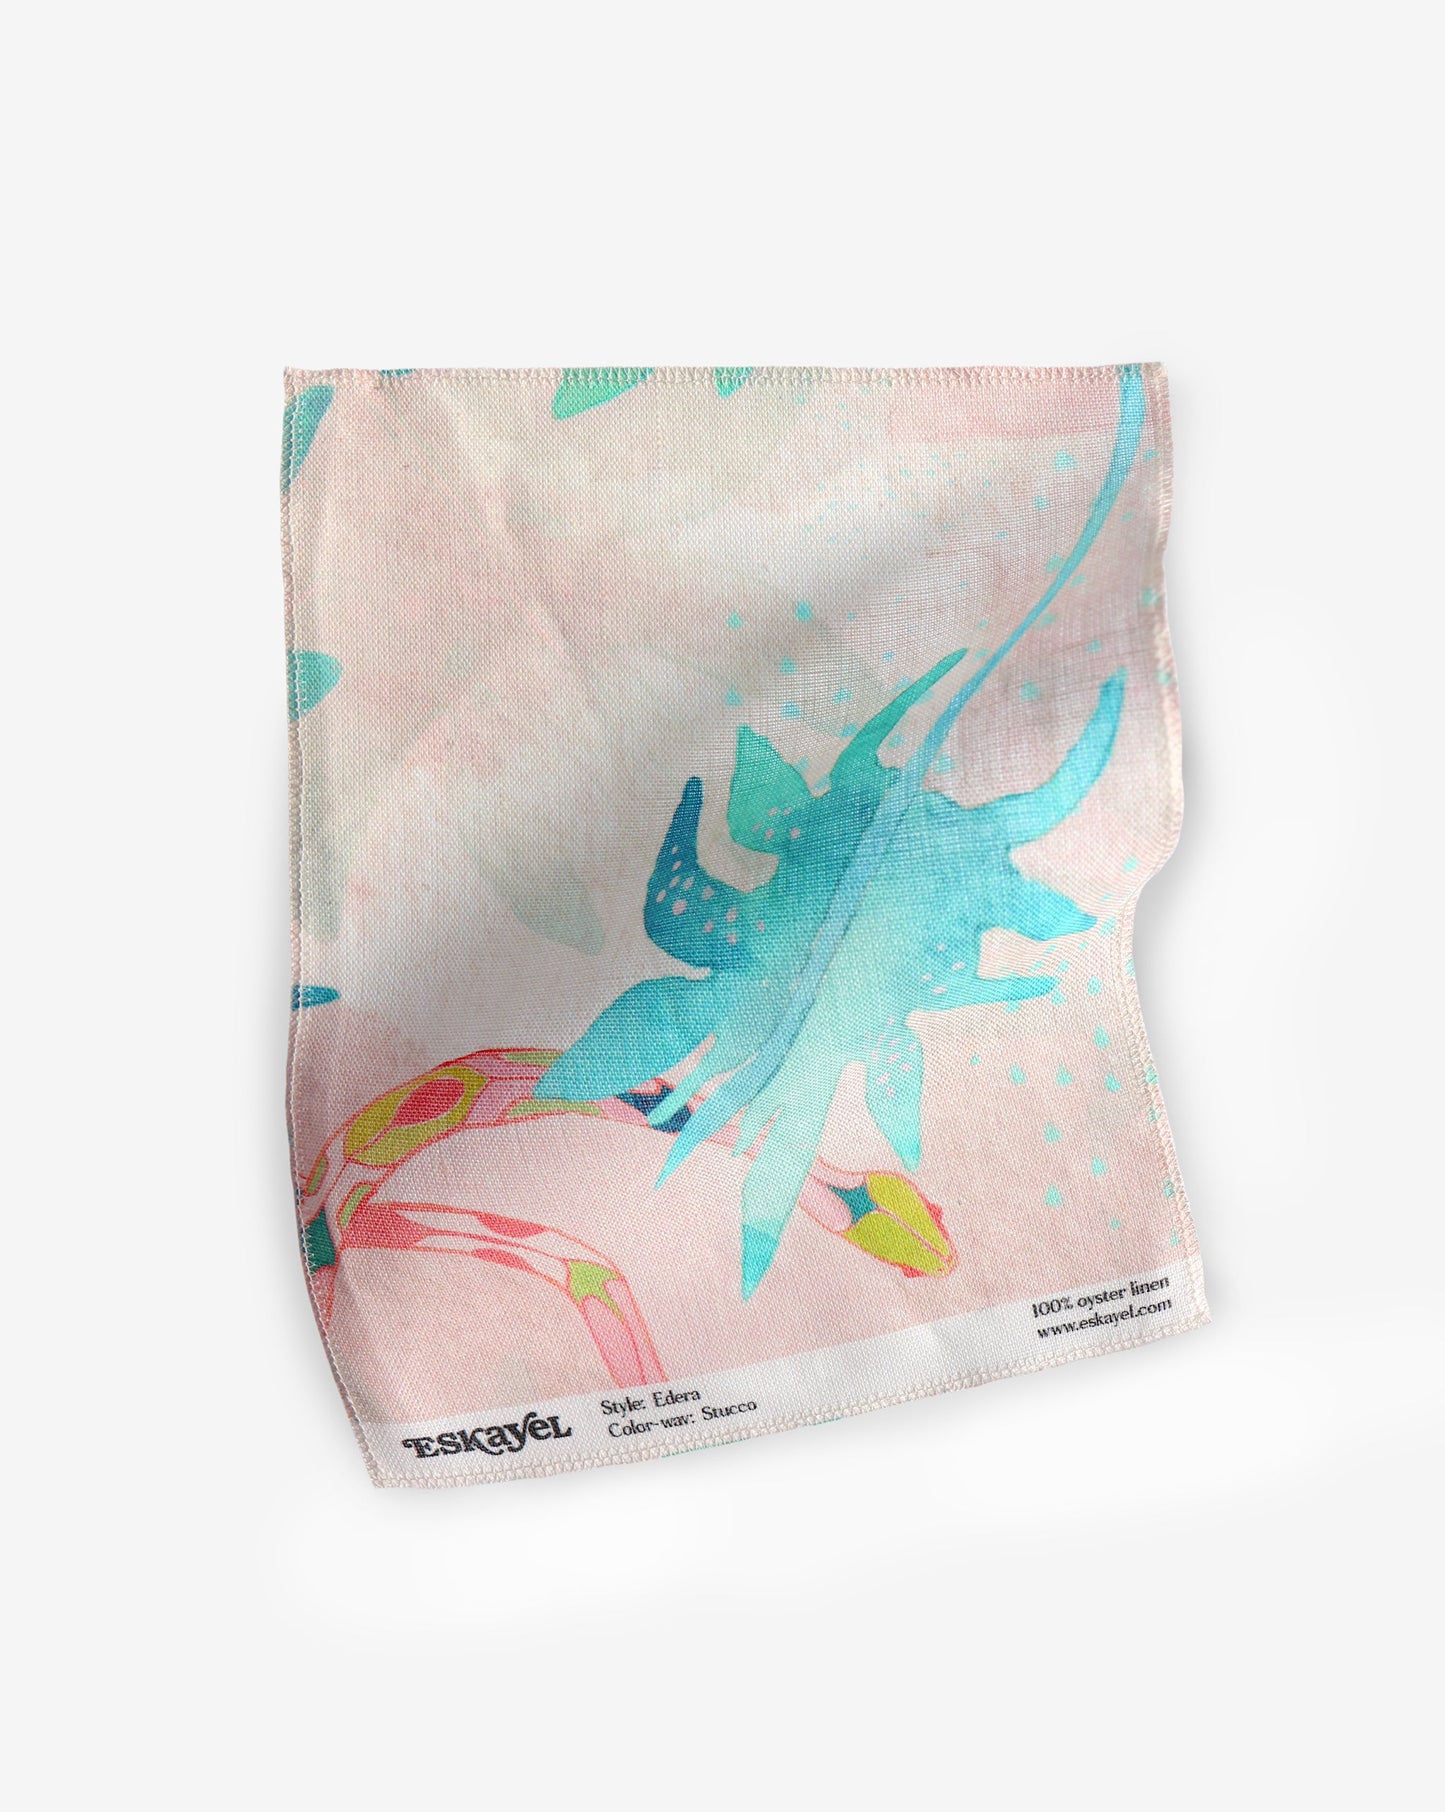 A pink and blue Edera Fabric Stucco with a chinoiserie-inspired pattern on it named Edera